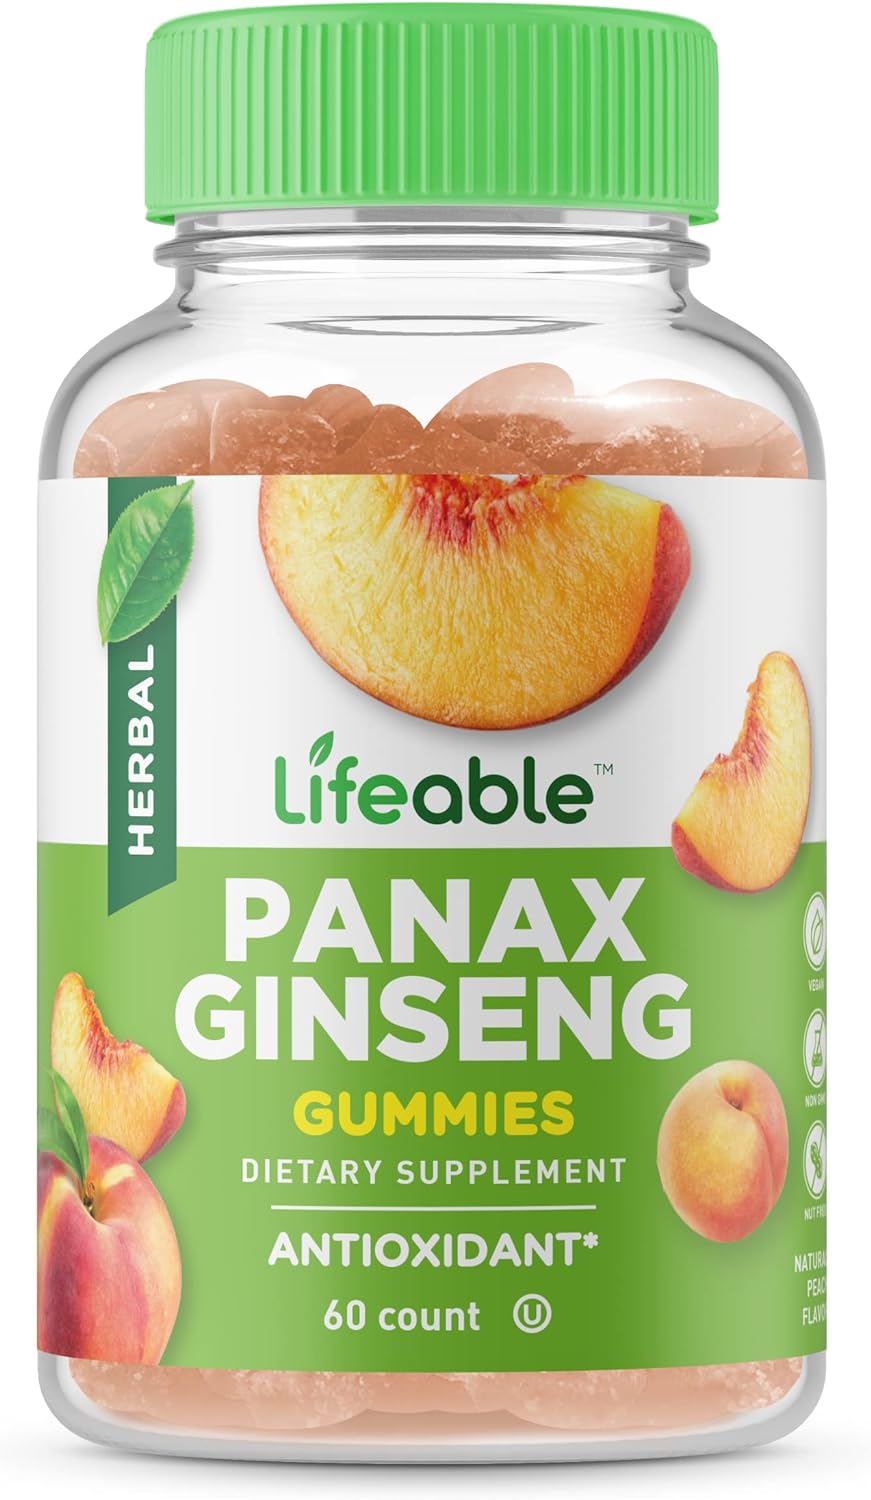 Lifeable Panax Ginseng Root Extract - Great Tasting Natural Flavor Gummy Supplement Vitamins - Non-GMO, Gluten-Free, Vegan, Chewable - for Antioxidant Support - for Adults Men Women Kids - 60 Gummies